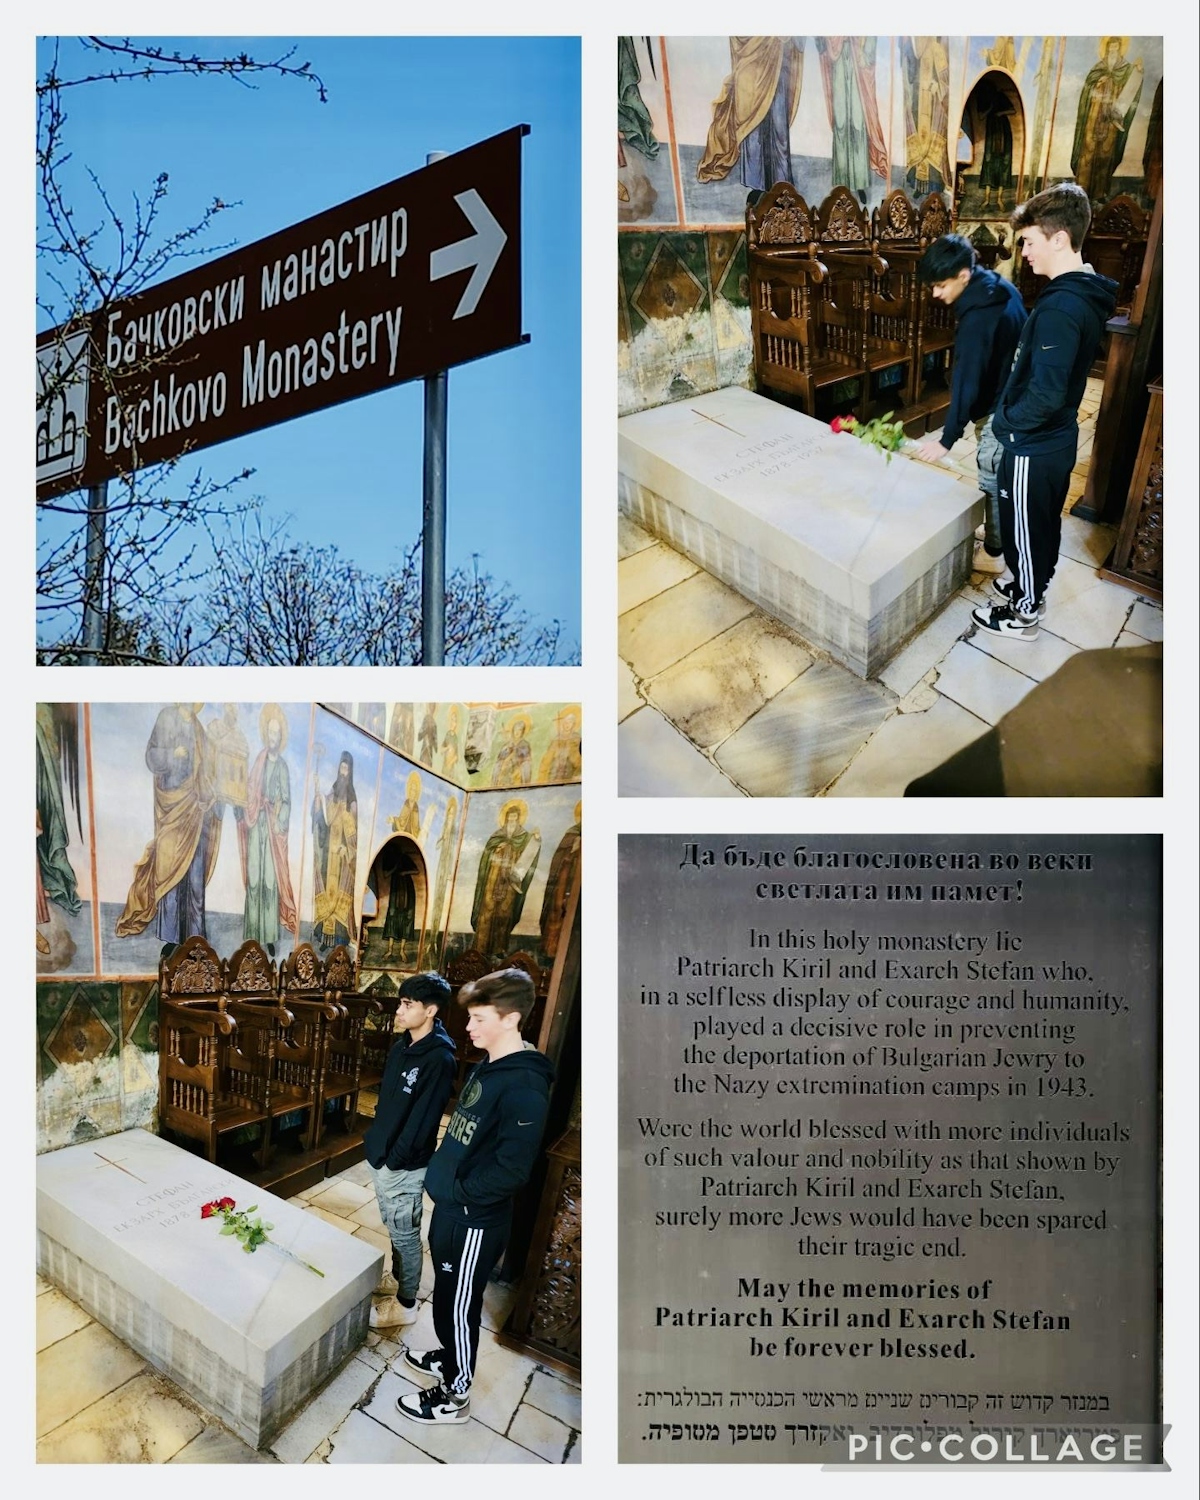 Paid tribute to Patriarch Kiril and Exarch Stefan who played an important role in preventing the deportation of Bulgarian Jews to Nazy extermination camps, 1943 Holy Monastery